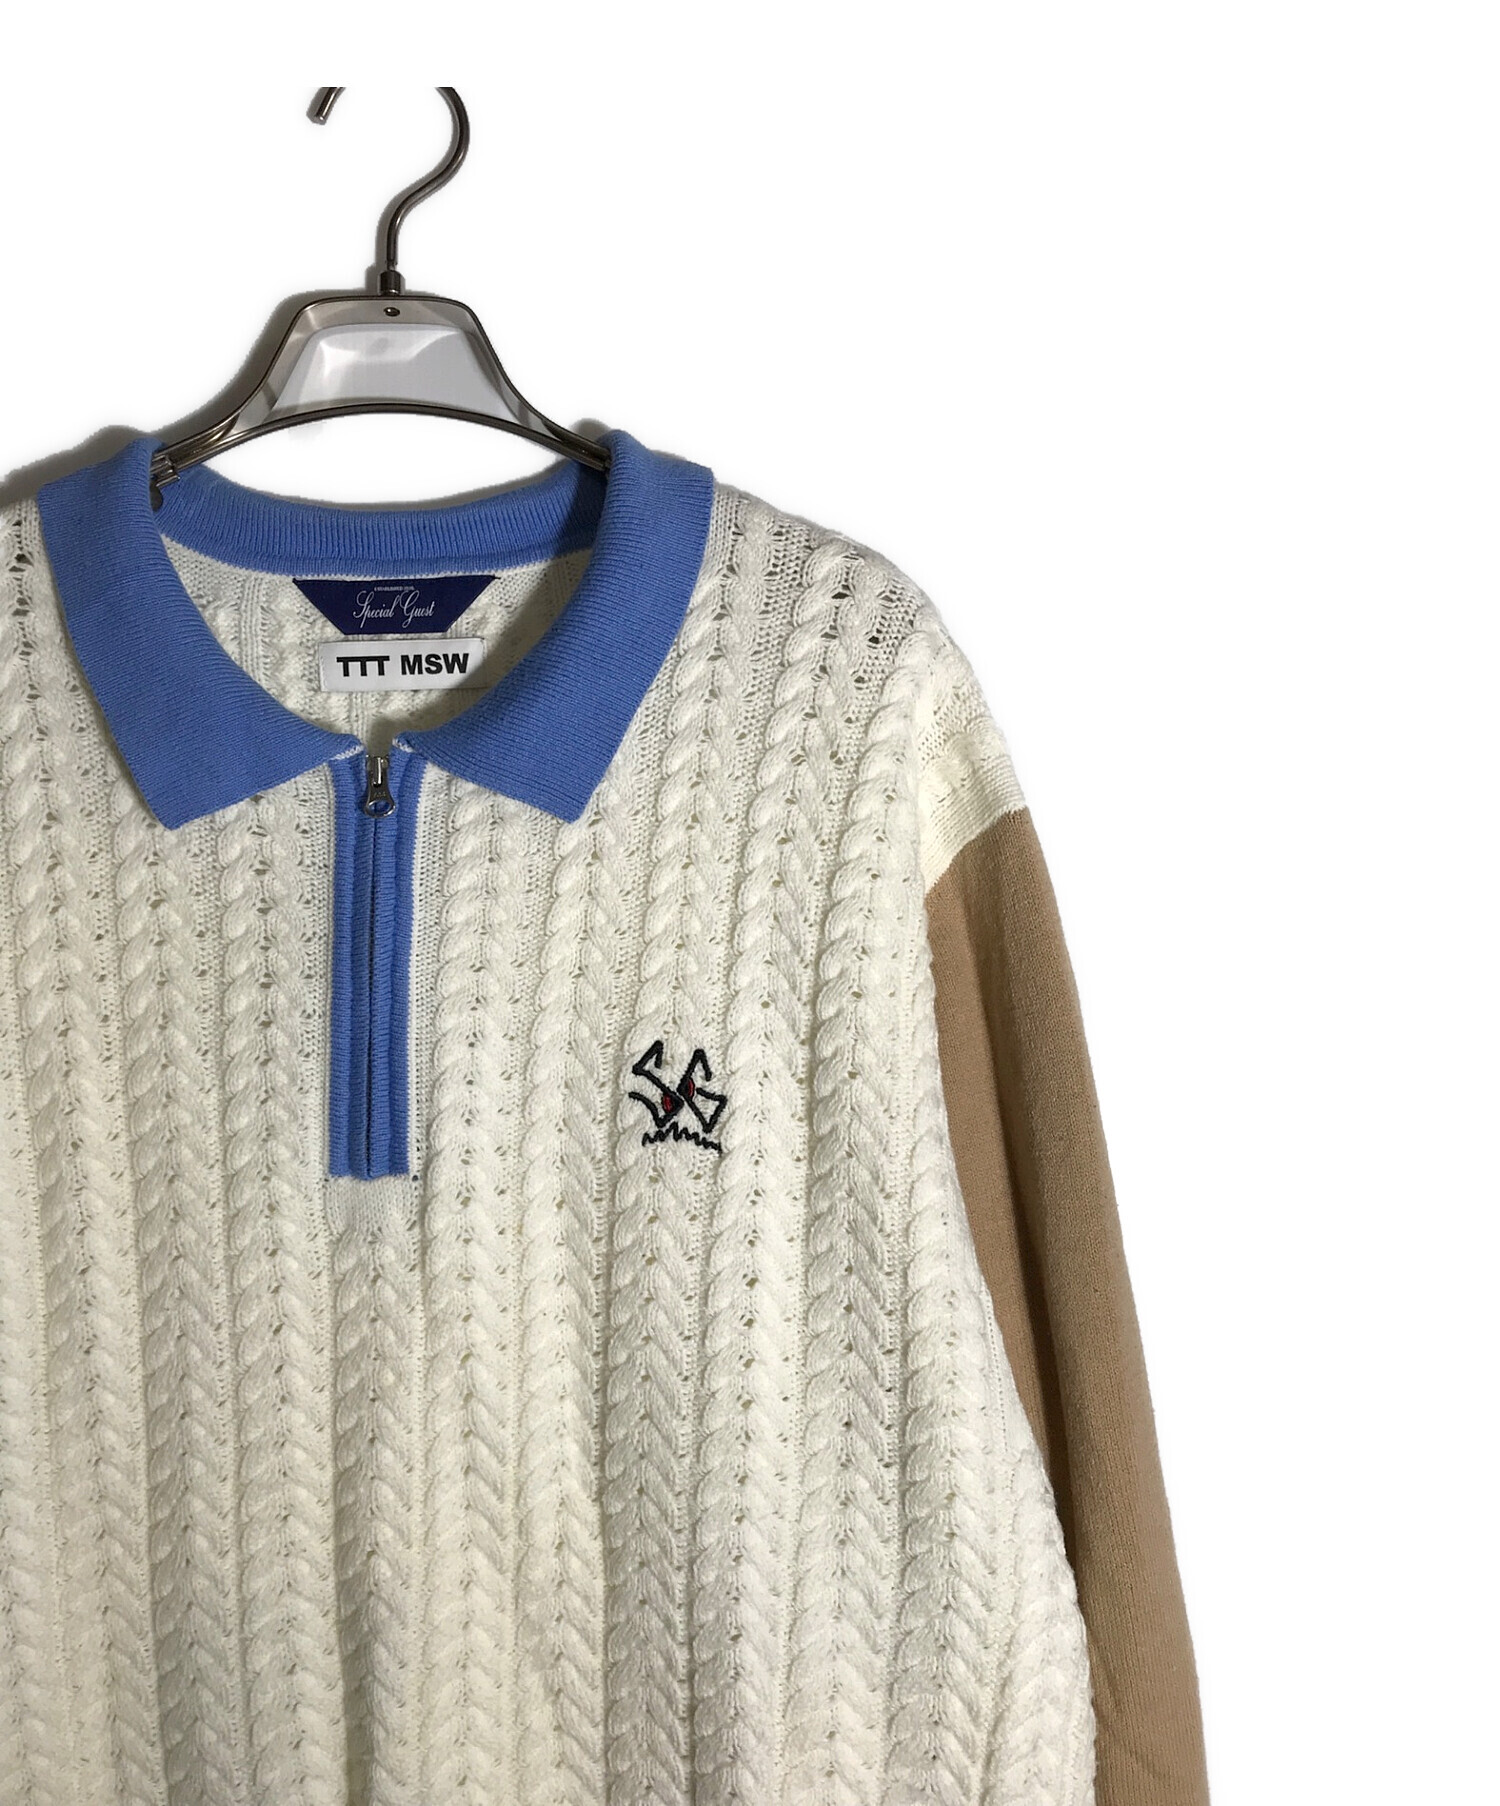 TTT_MSW SPECIAL GUEST Knit Polo WHITE ニット/セーター トップス メンズ 先着予約